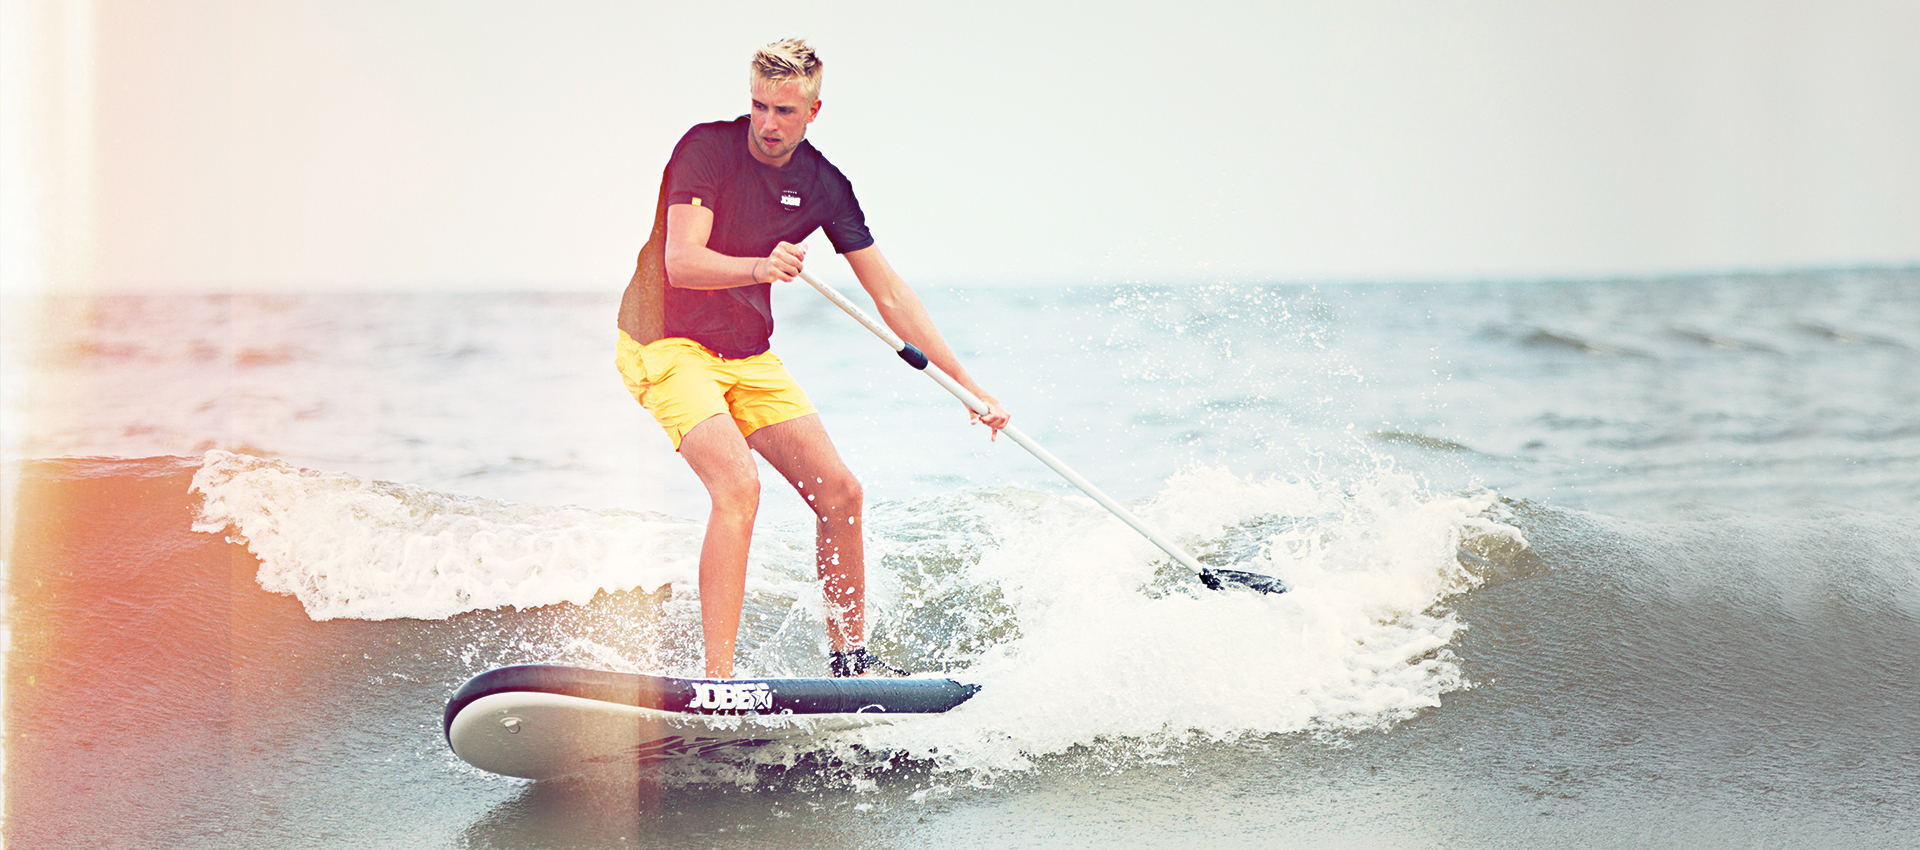 Whatever your style is, weve got the perfect SUP for you!